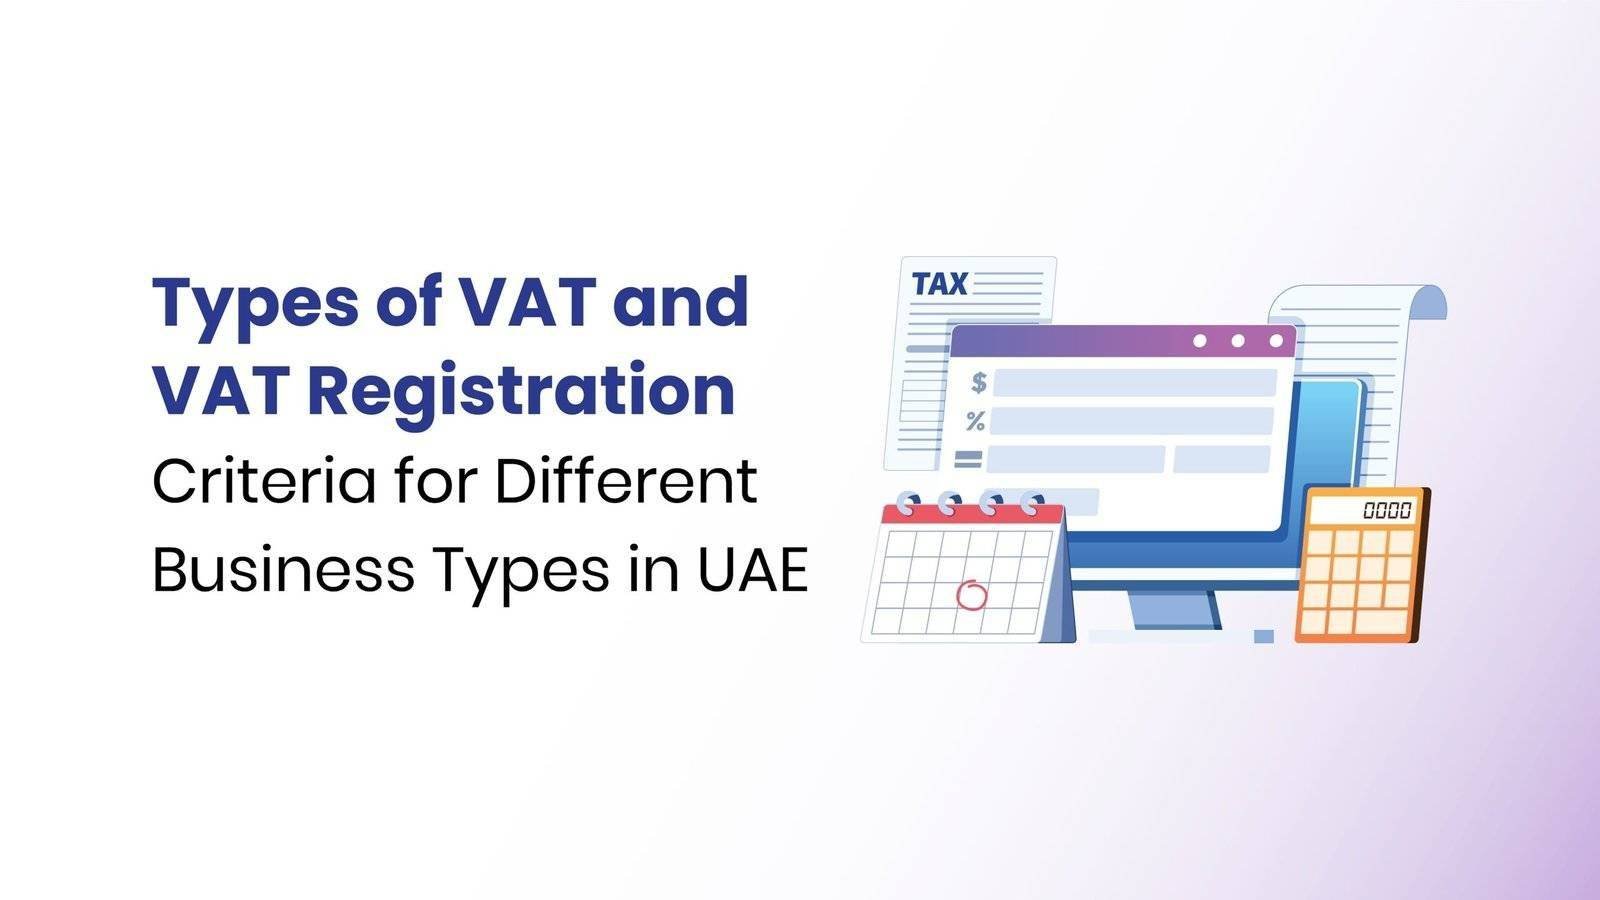 Types of VAT and VAT Registration Criteria for Different Business Types in UAE